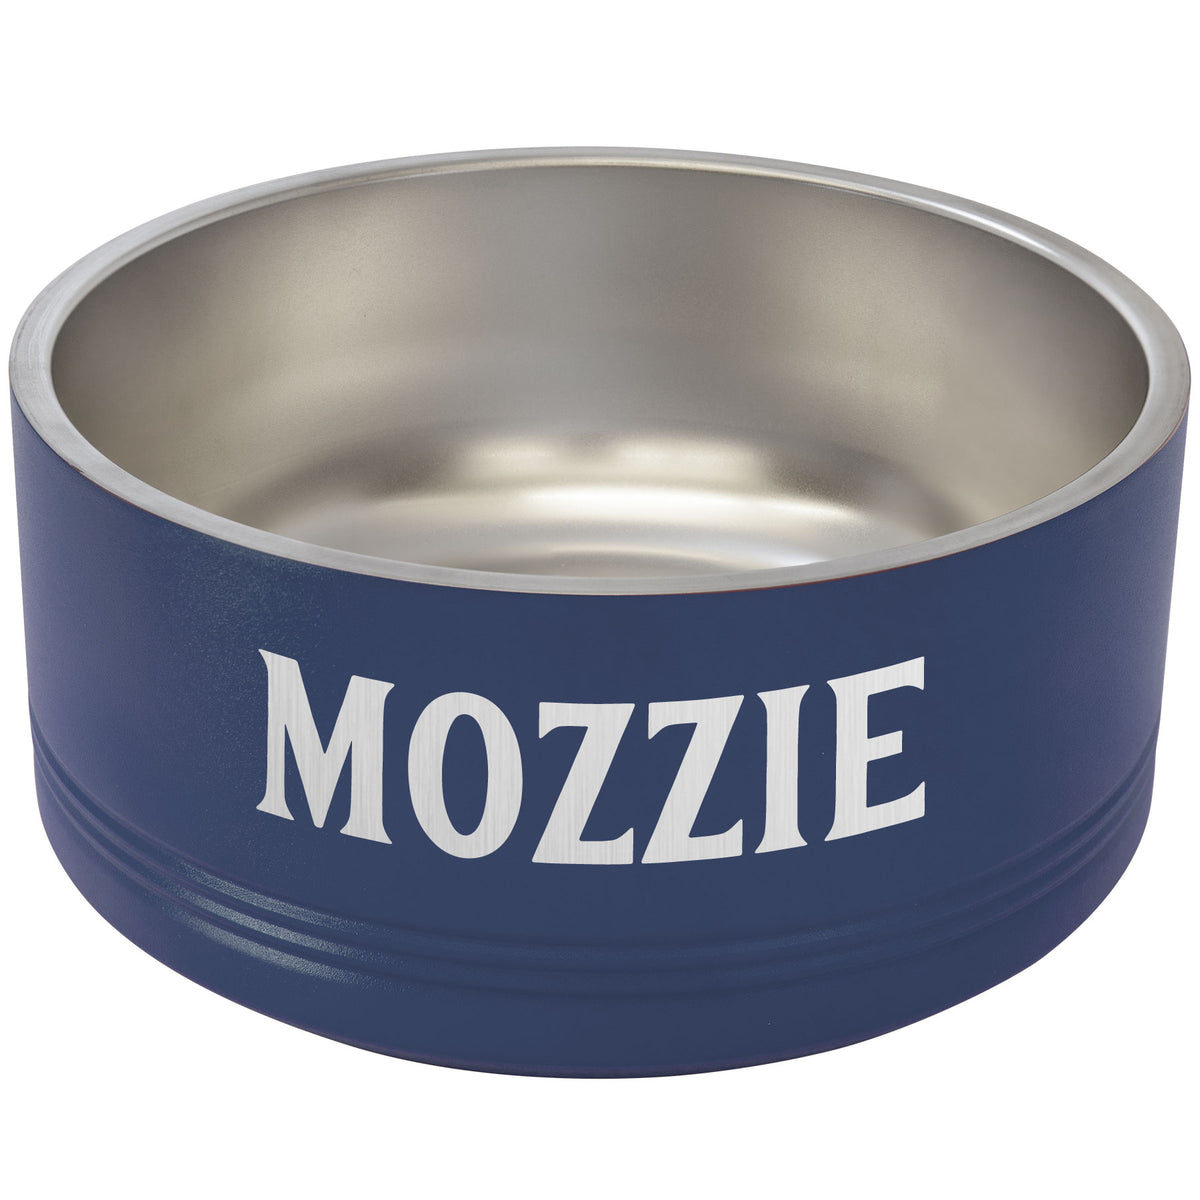 64 oz Stainless Steel Insulated Pet Bowl